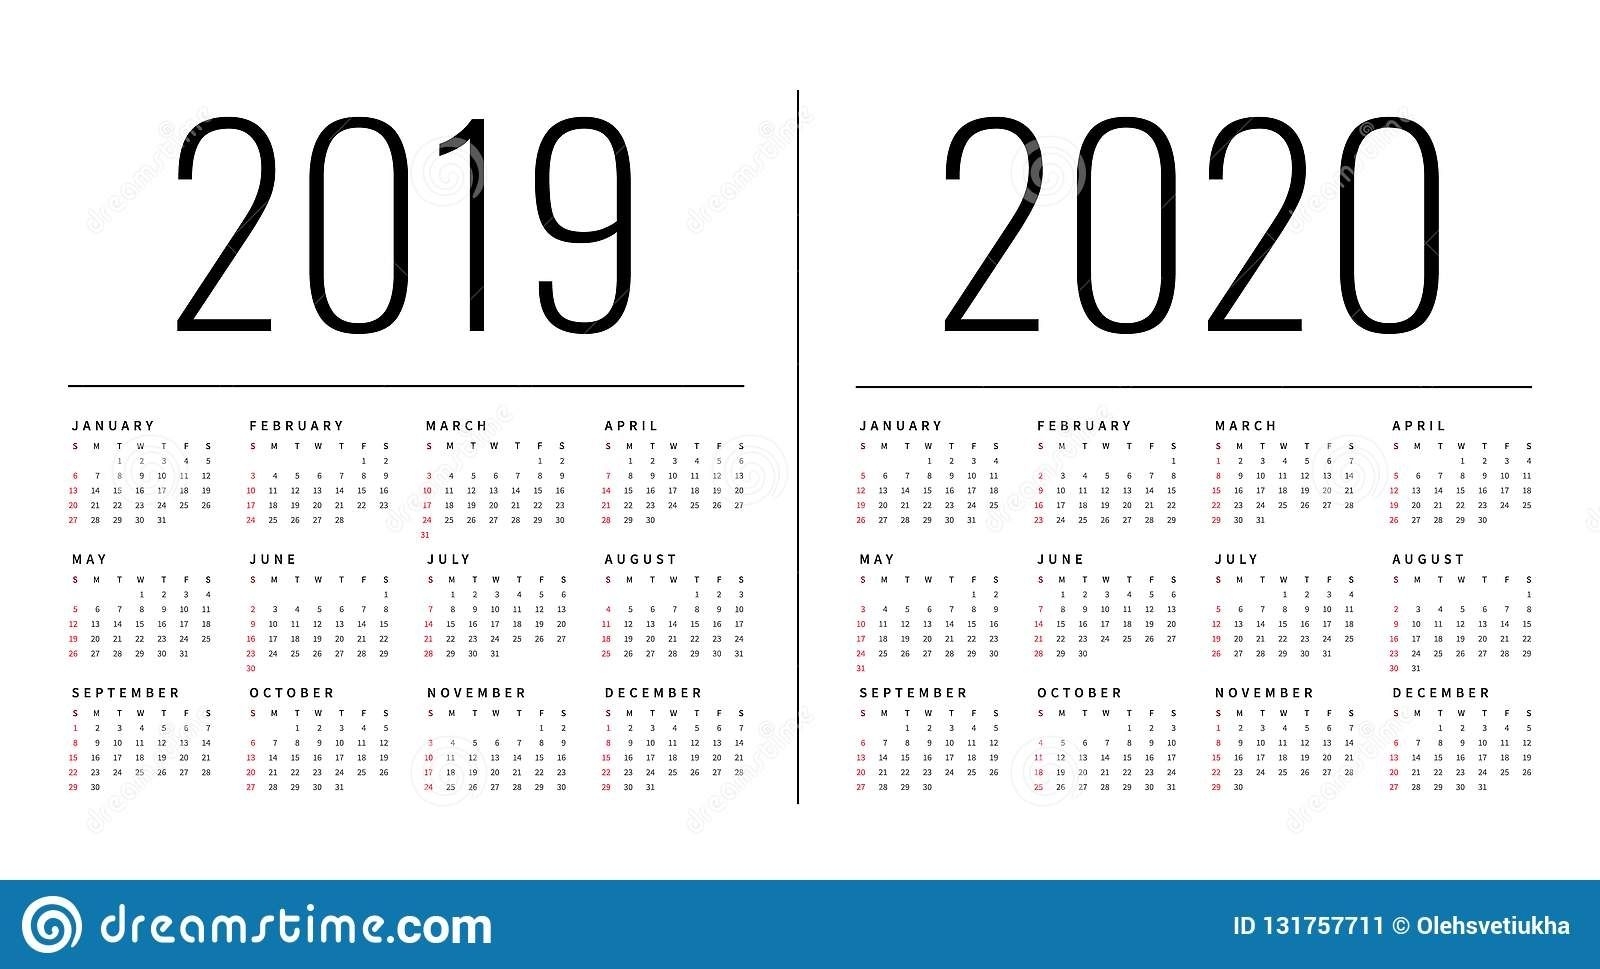 Illustration About Mockup Simple Calendar Layout For 2019 intended for 2020 Calendar Starts On Monday